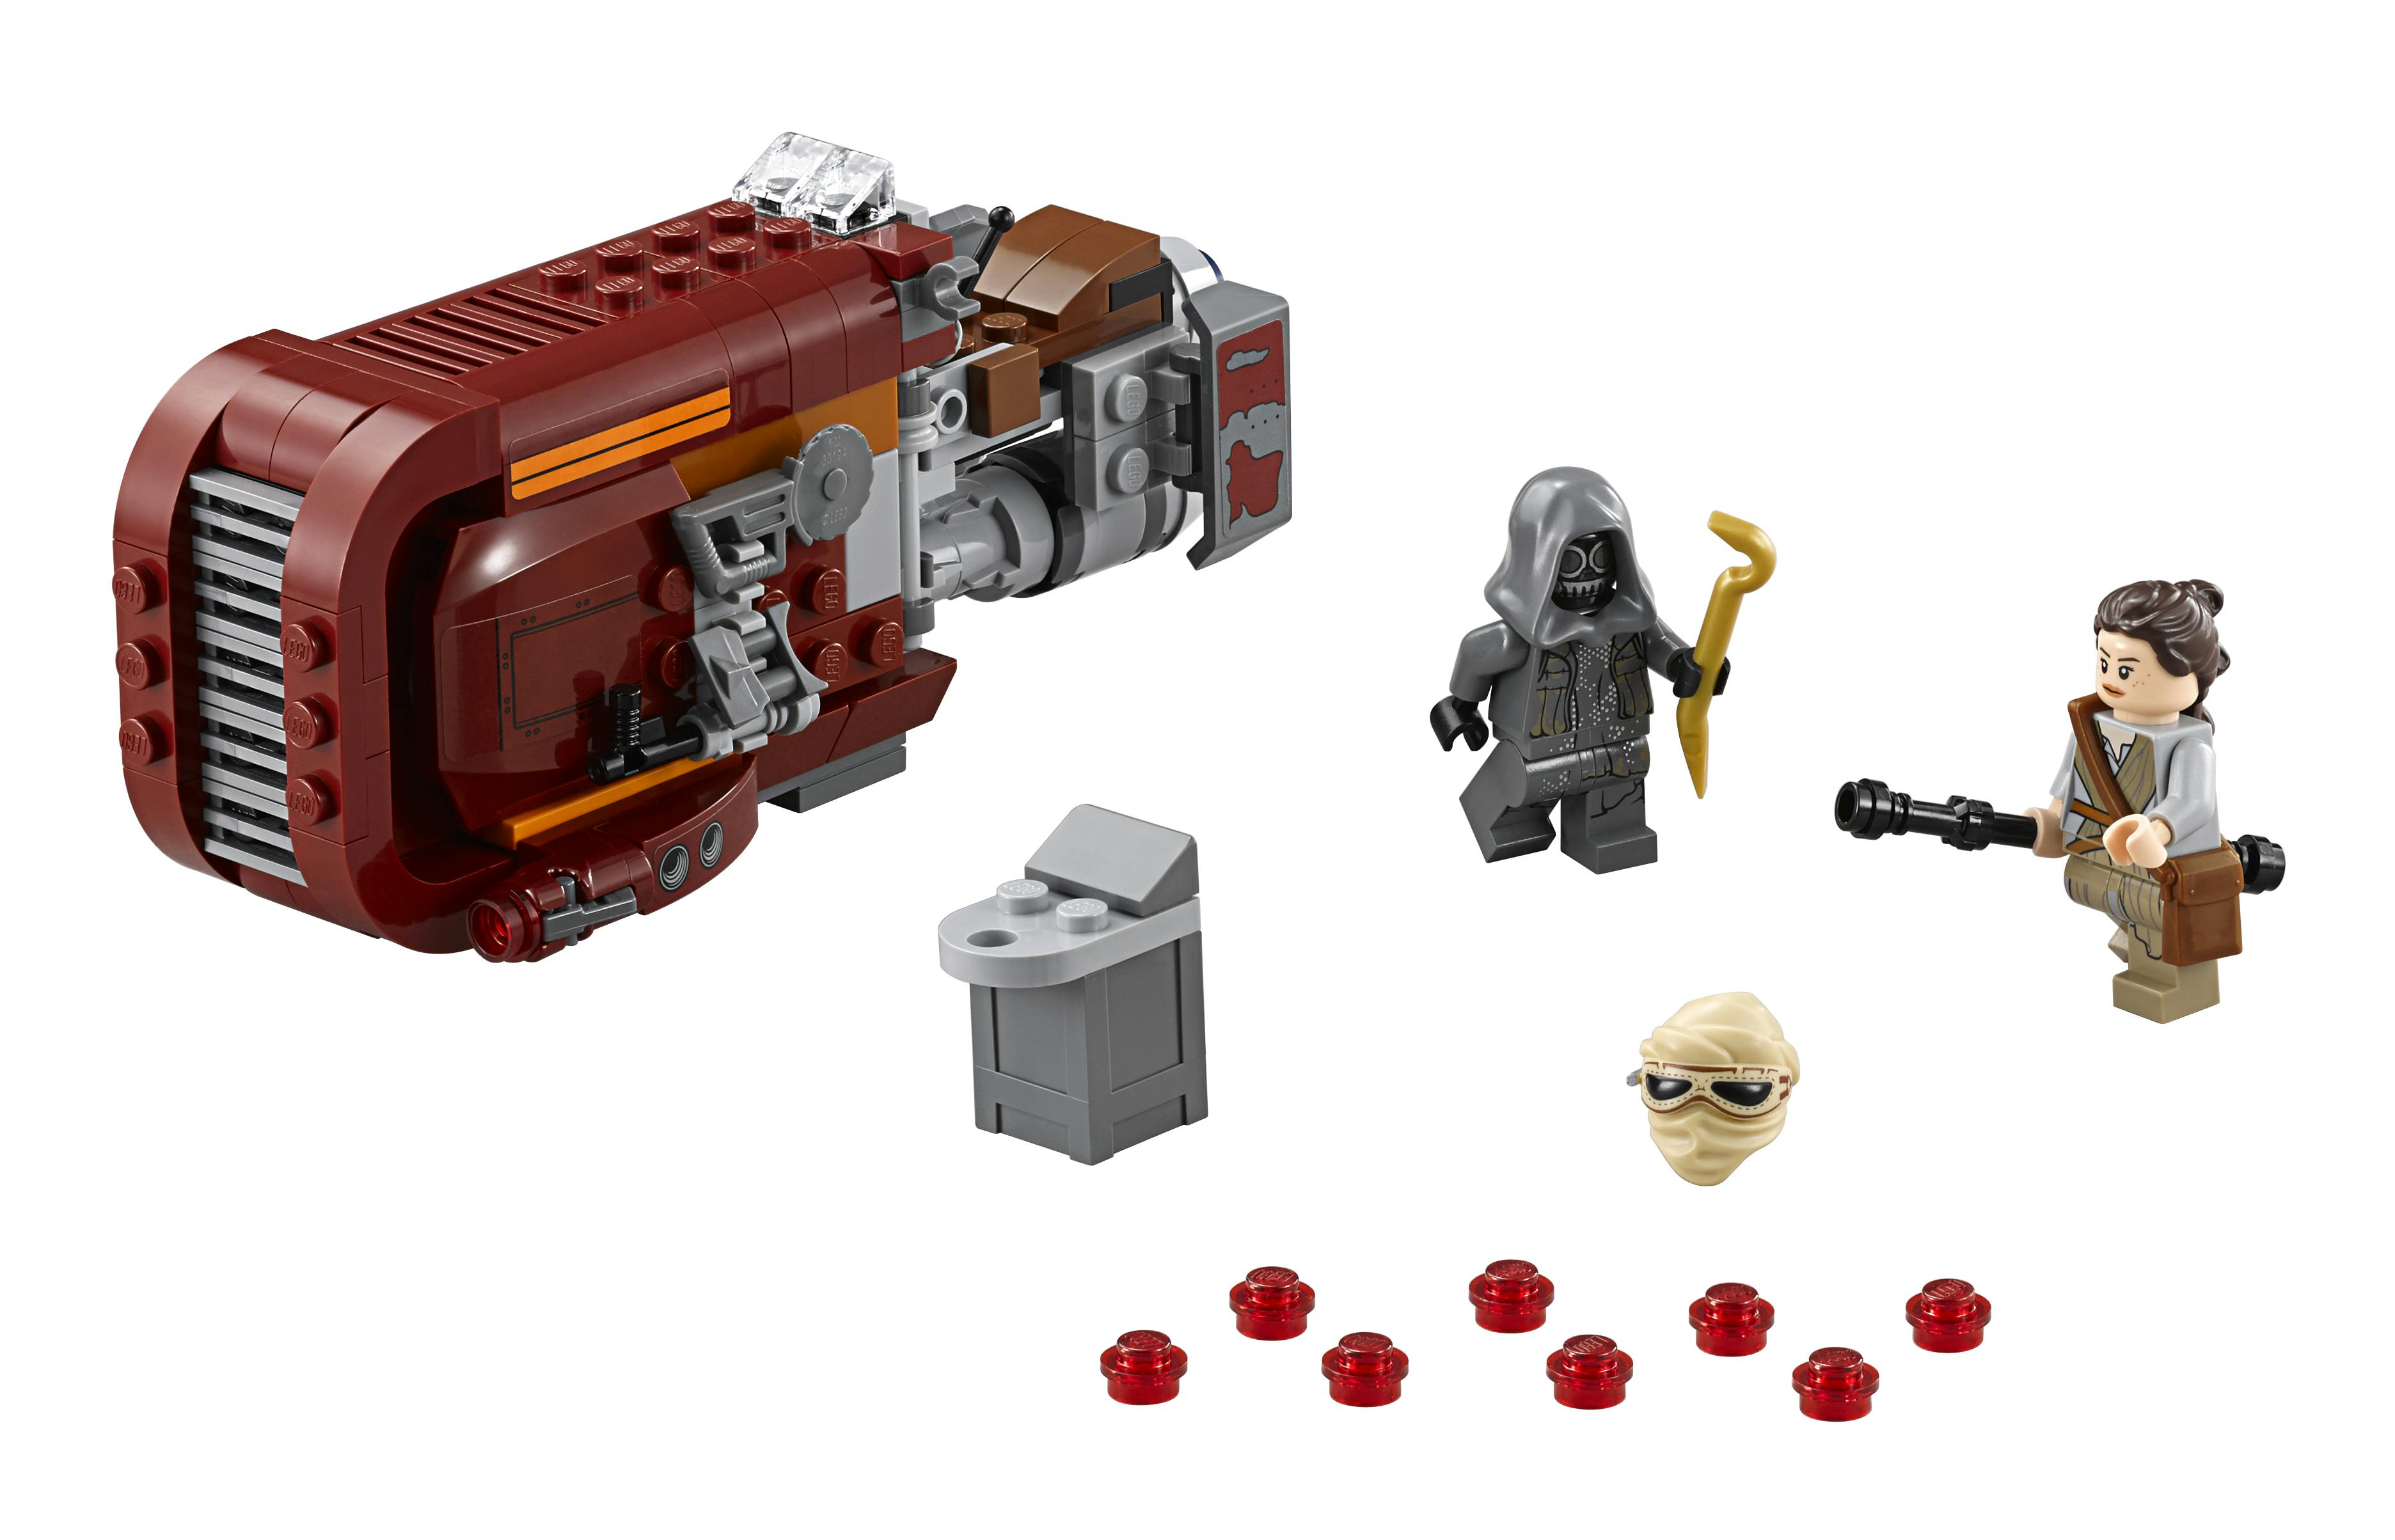 Ellers Udfyld Gnide 7 new 'Star Wars' Lego sets you can buy on Force Friday - The Daily Dot